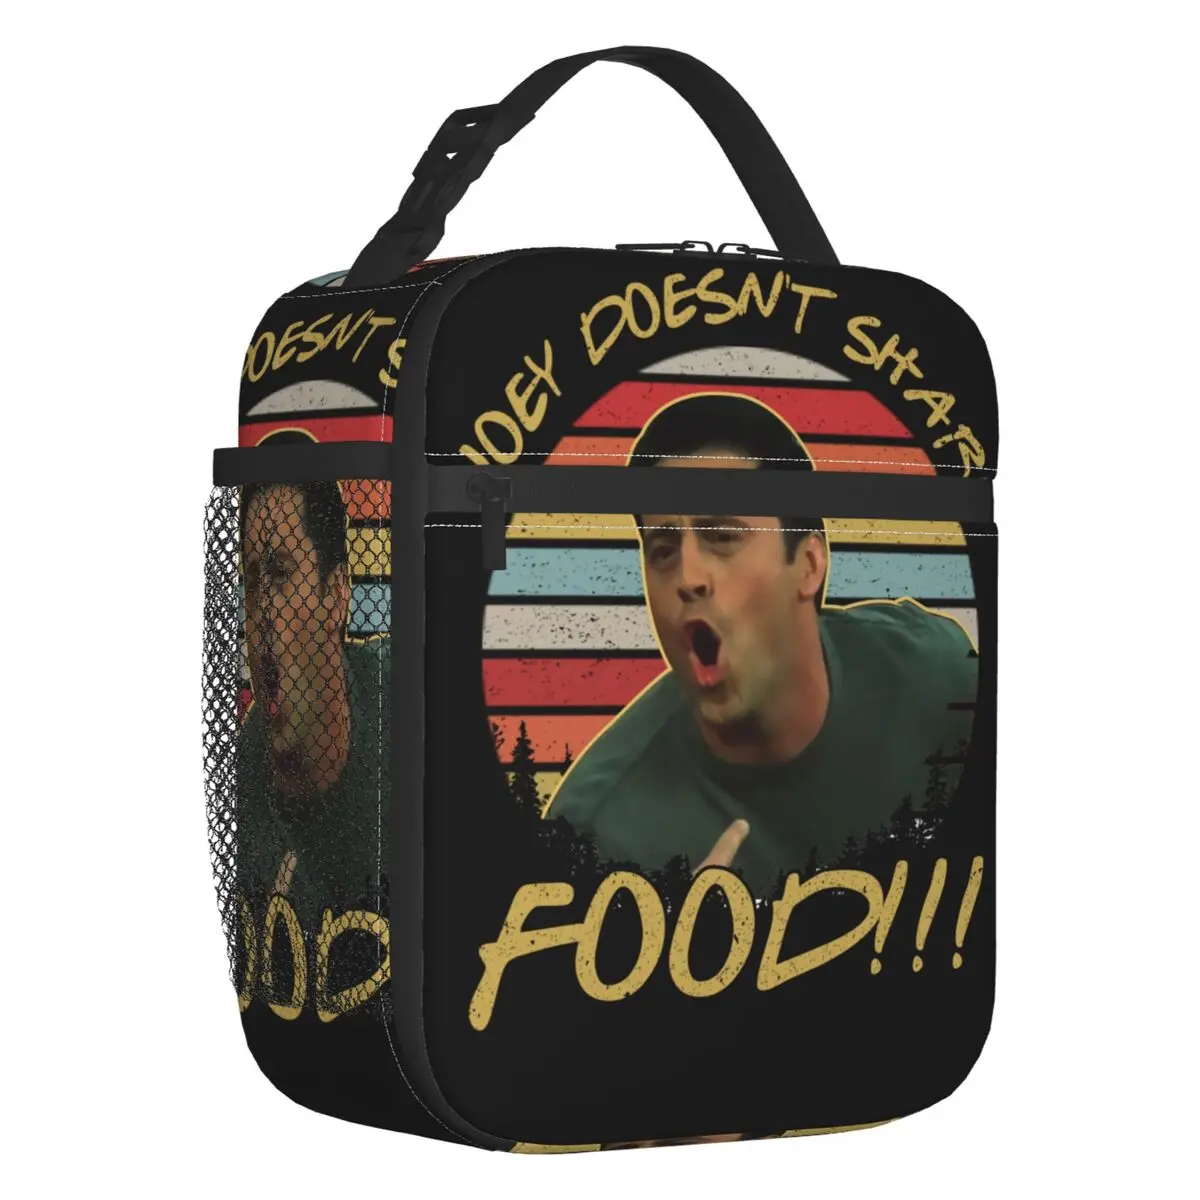 

Doesn't Share Food Quotes Tv Movie Thermal Insulated Lunch Bags Joey Friends Portable Lunch Tote for Outdoor Storage Food Box